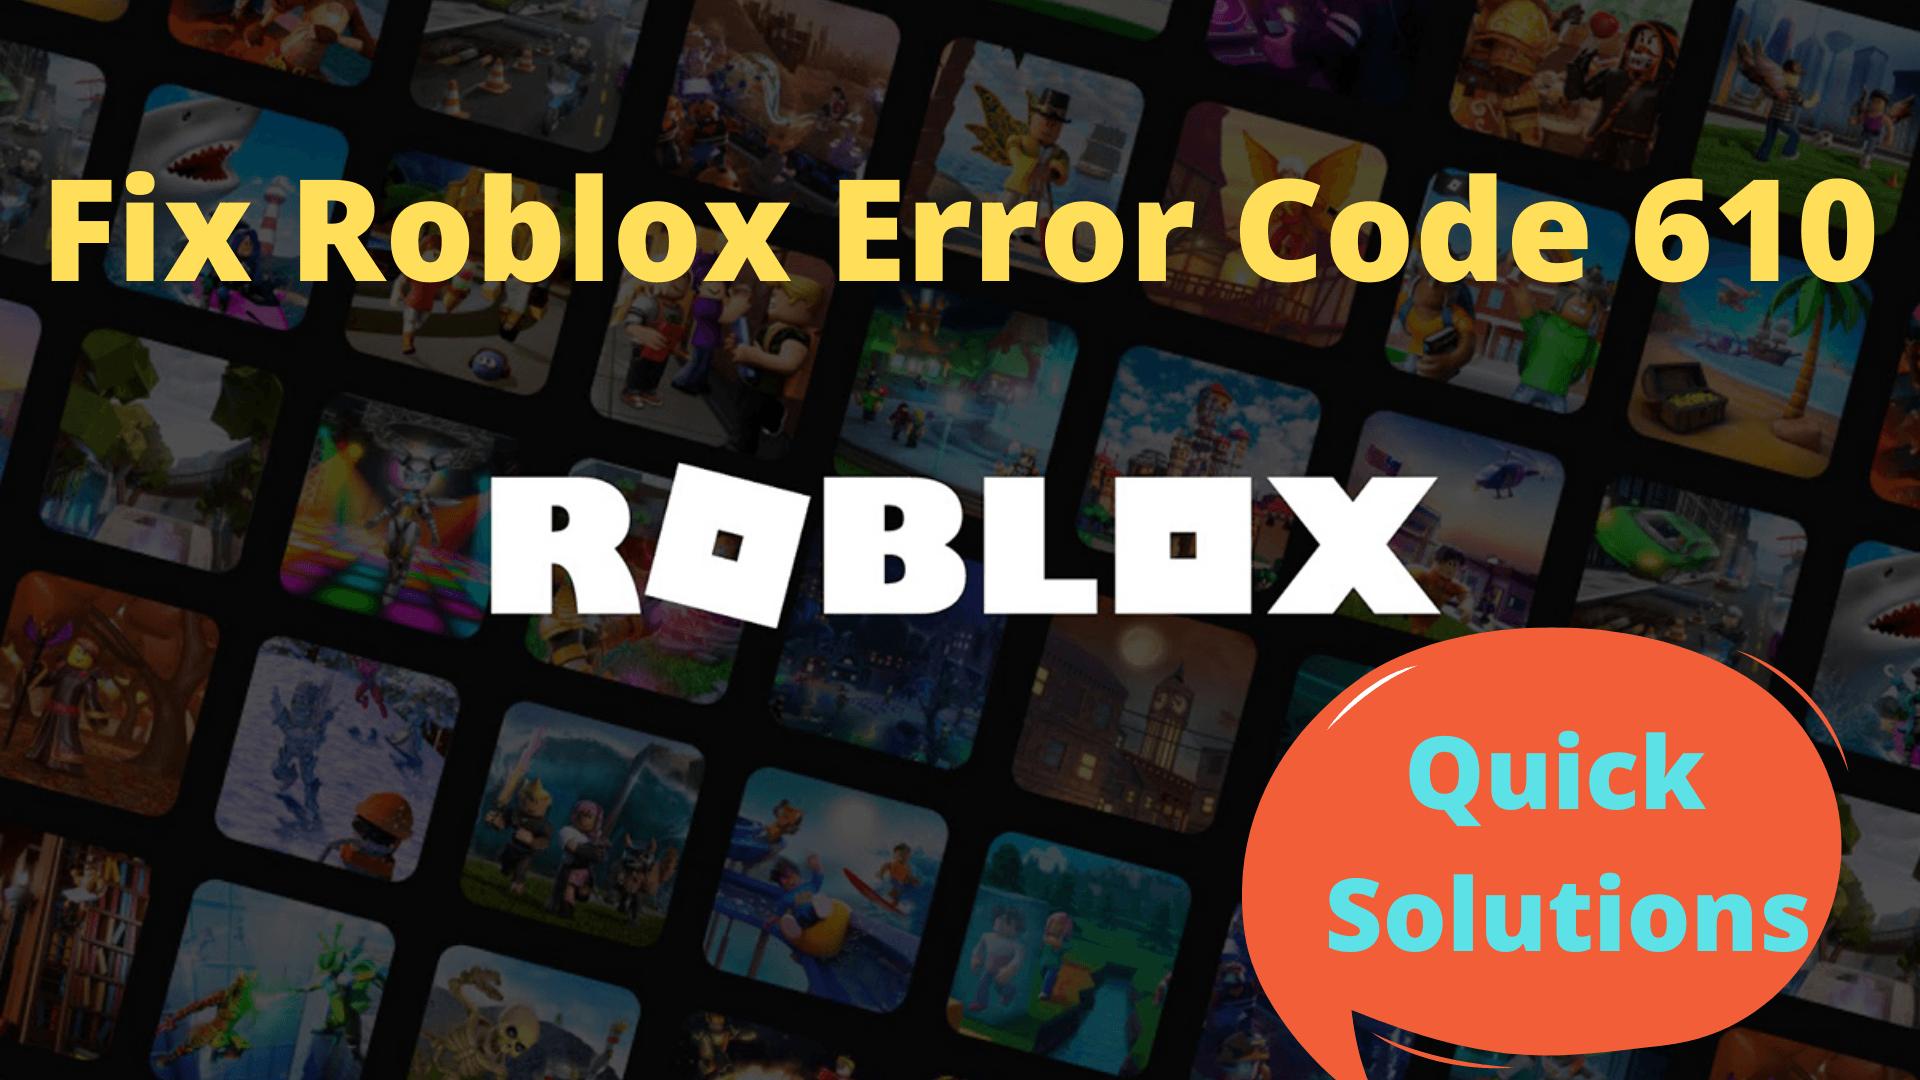 Error Code 610 Roblox Meaning